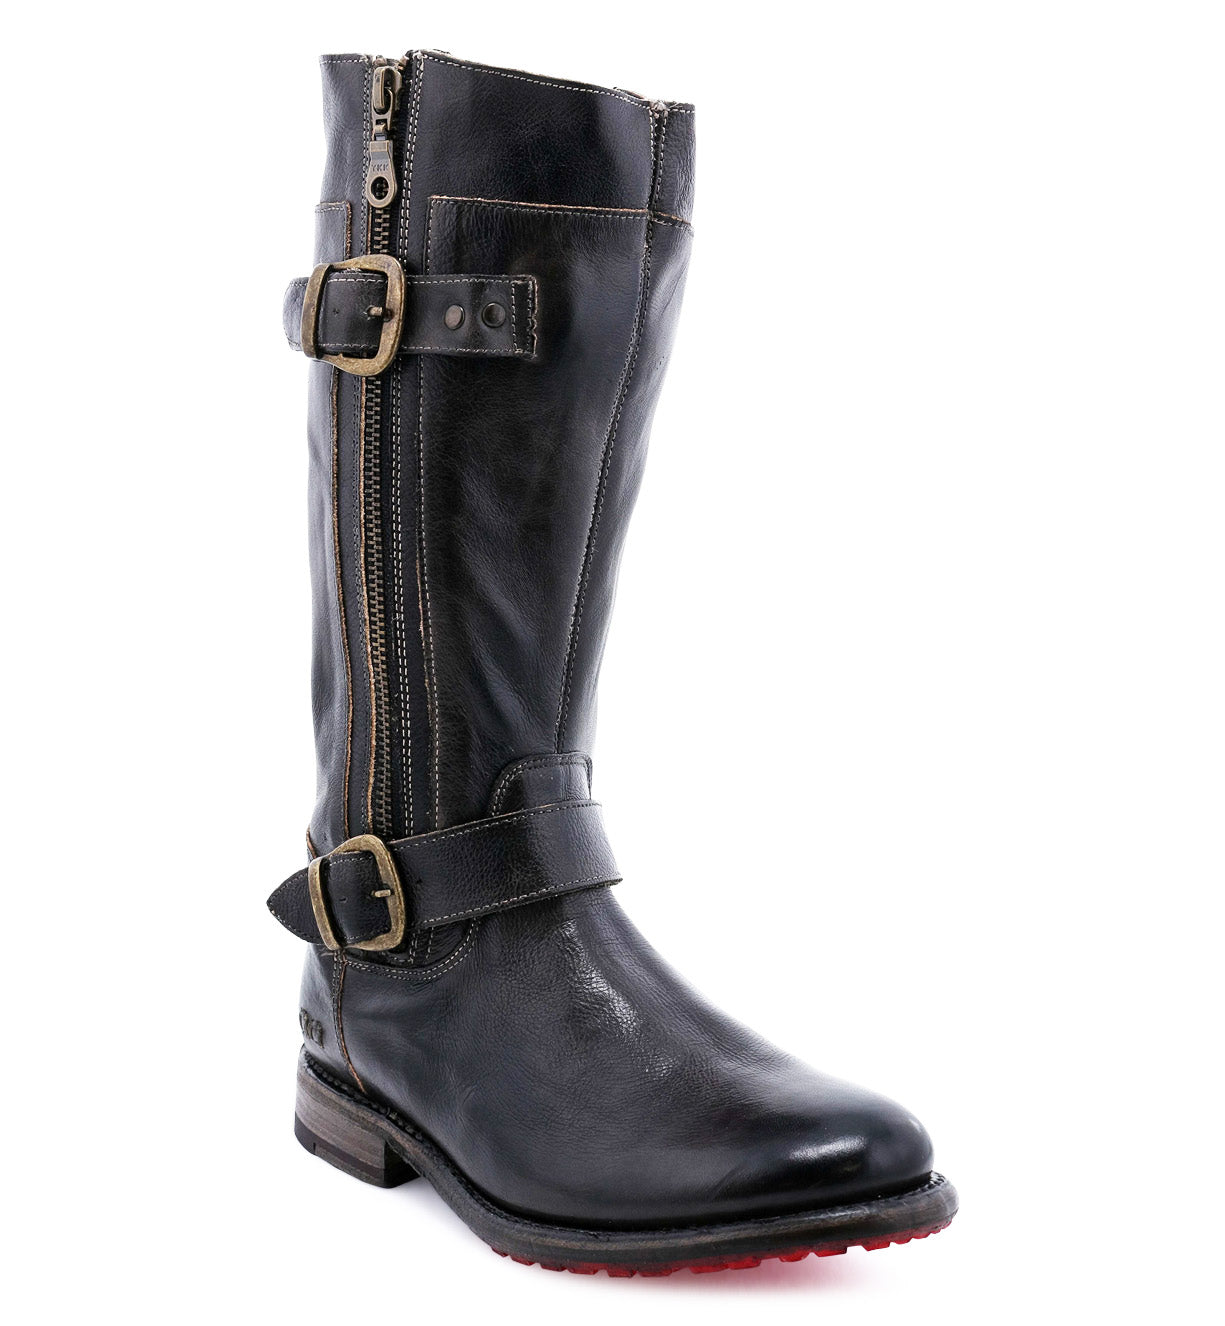 A women's Gogo Lug black leather boot with buckles and buckles by Bed Stu.